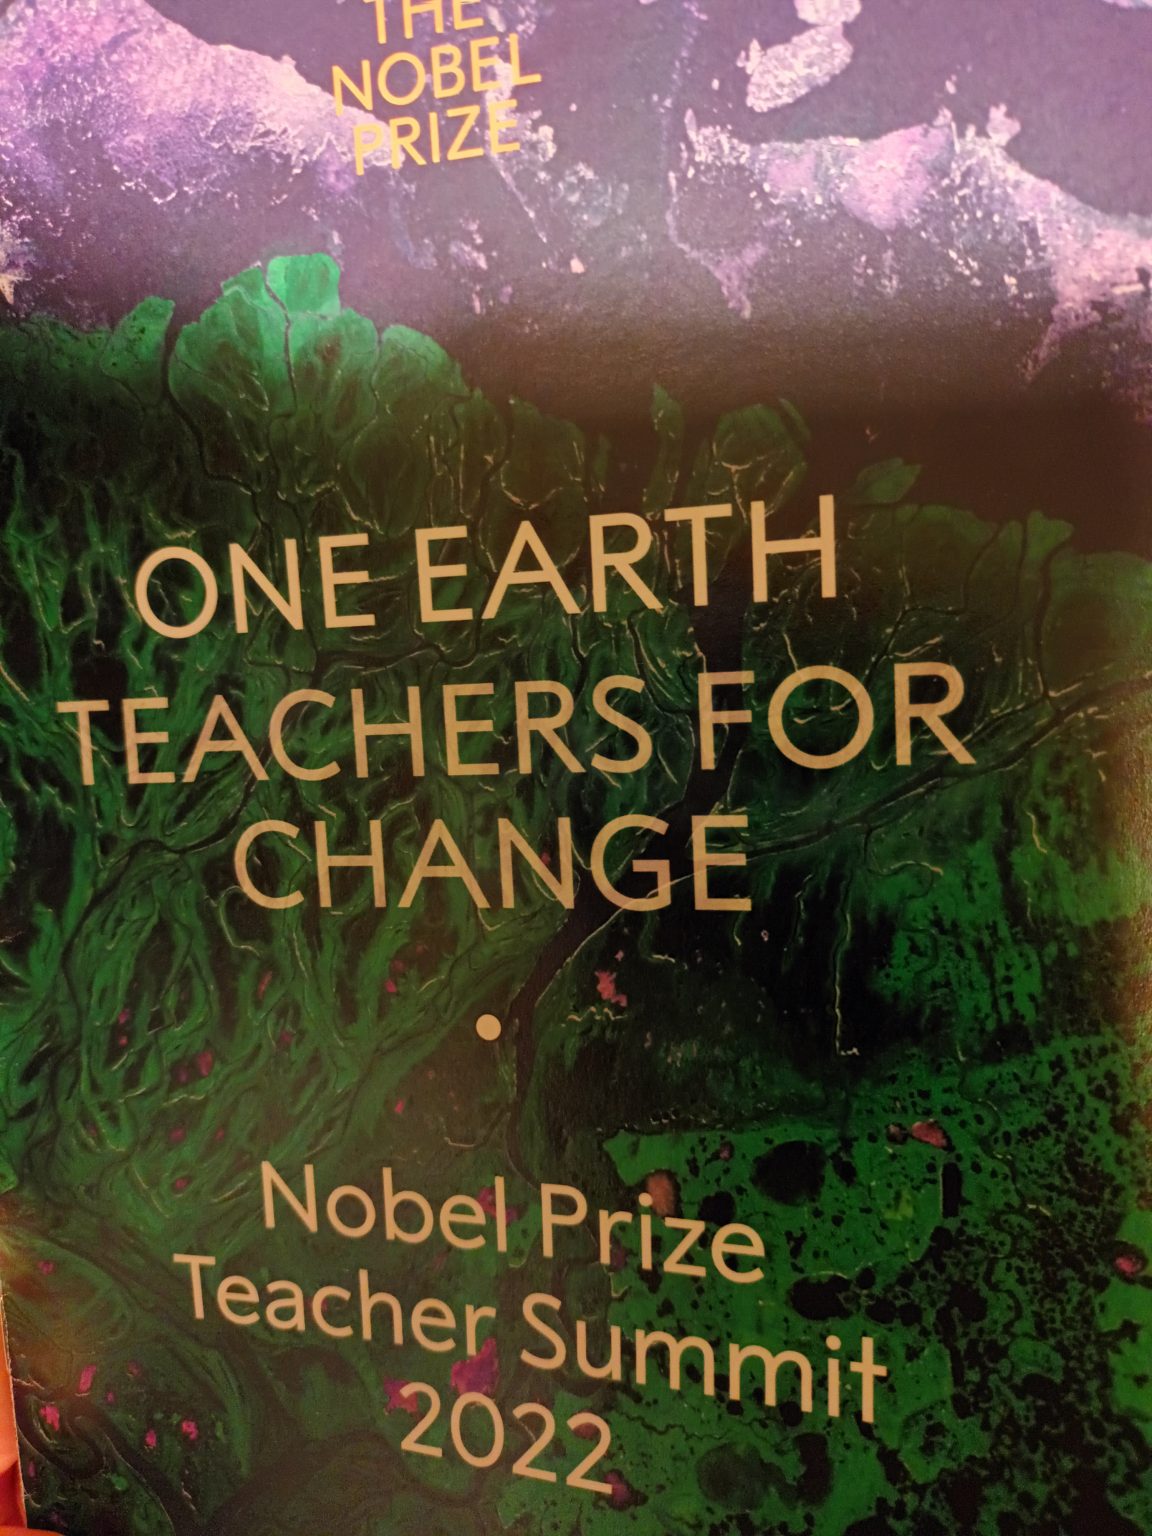 Participation in the Nobel Prize Teachers’ Summit in Stockholm